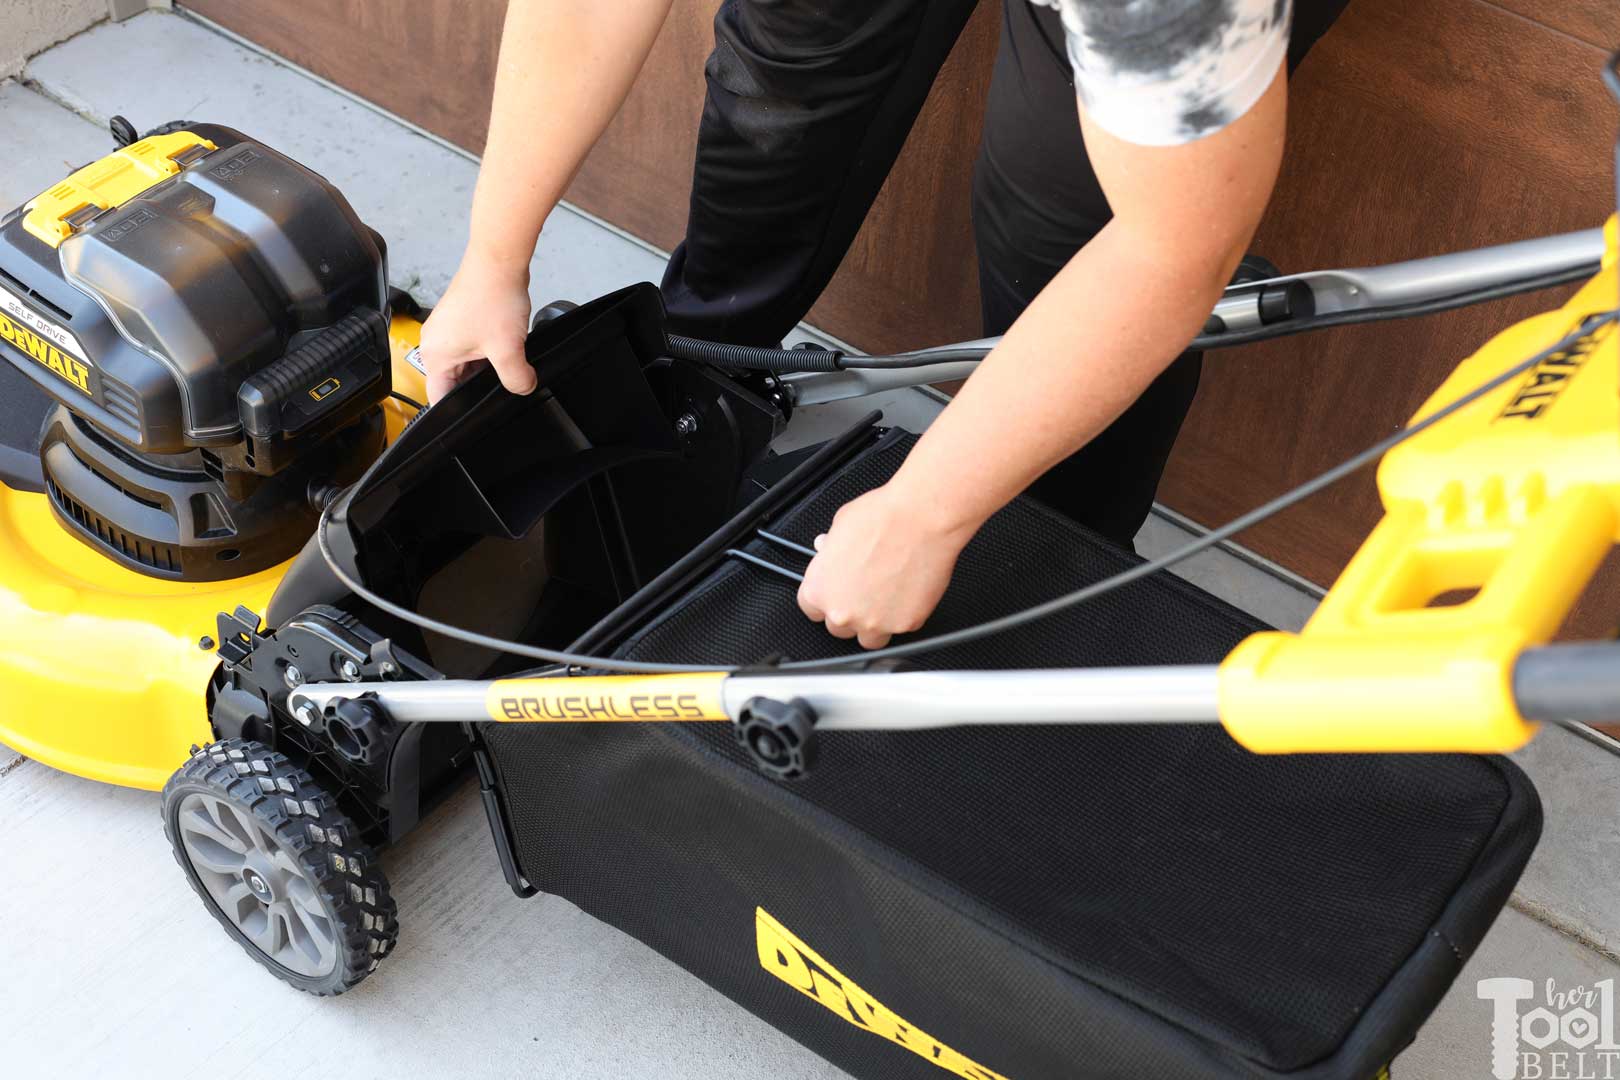 How to Attach a Bag to a Lawn Mower  